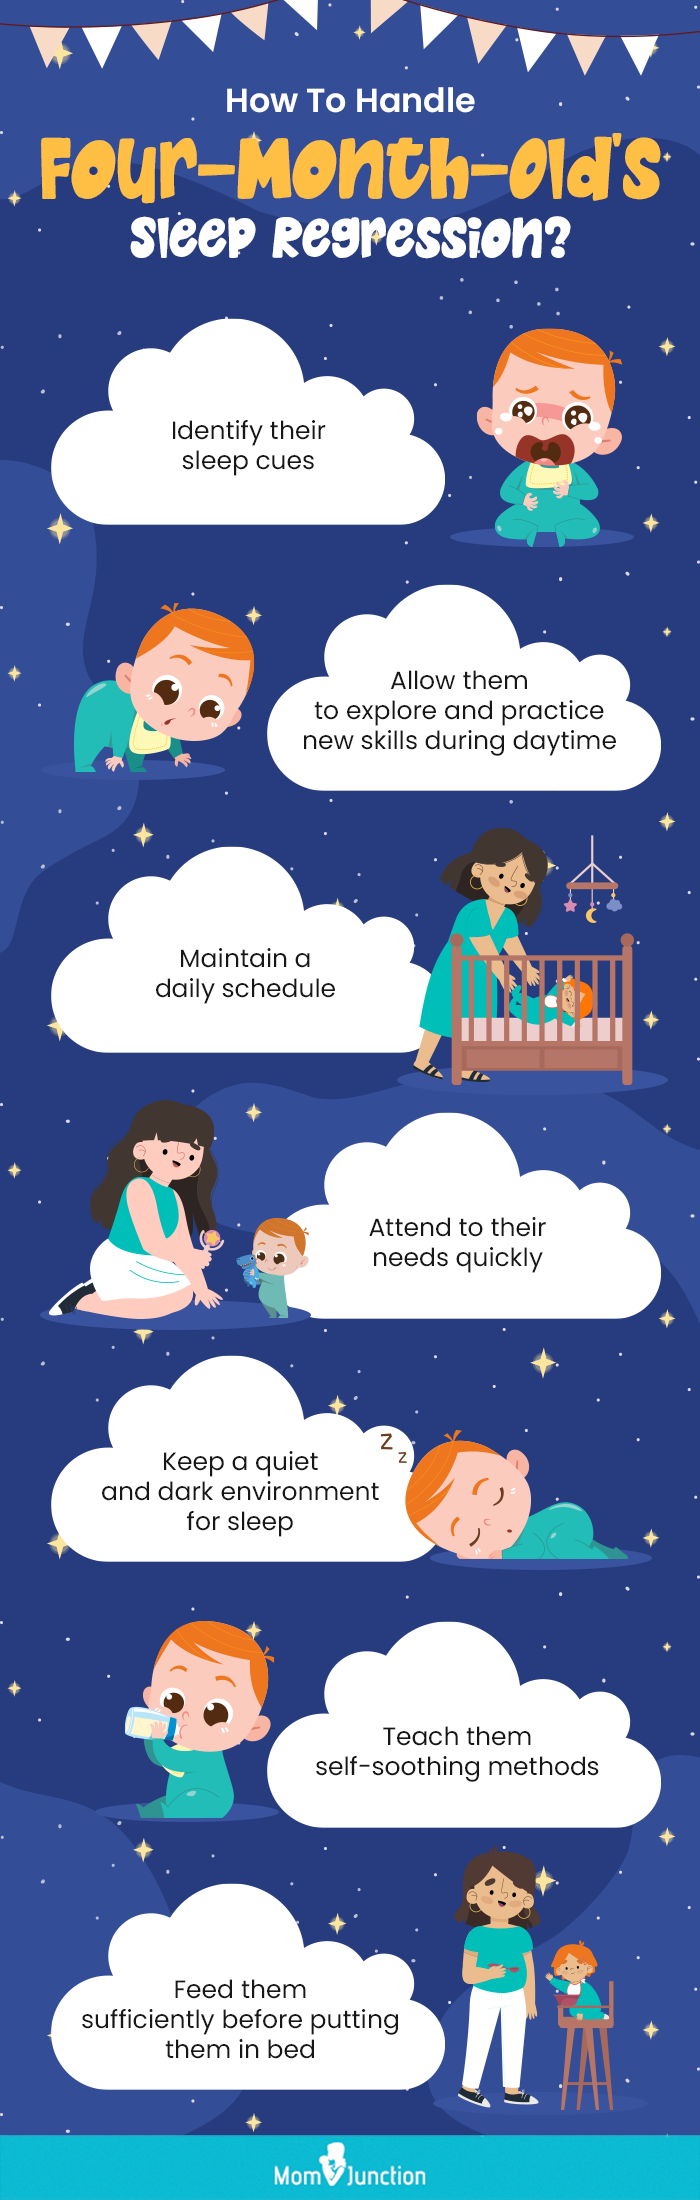 how to handle four month olds sleep regression (infographic)